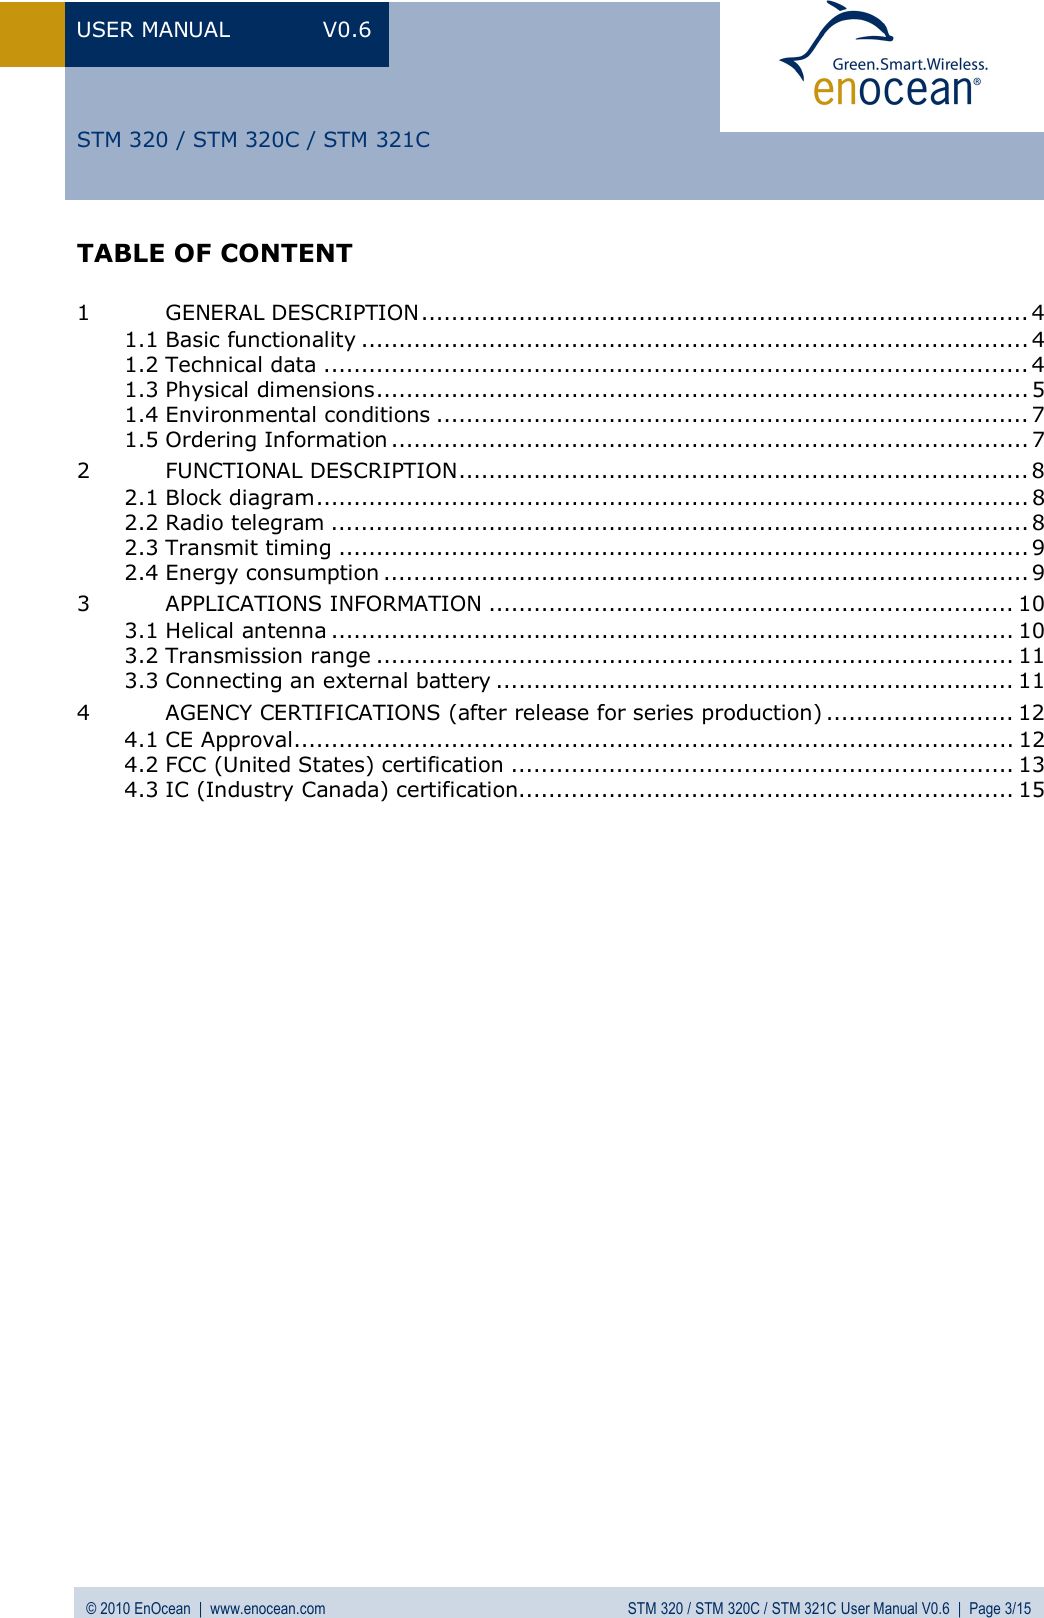 USER MANUAL V0.6 © 2010 EnOcean  |  www.enocean.com STM 320 / STM 320C / STM 321C User Manual V0.6  |  Page 3/15  STM 320 / STM 320C / STM 321C TABLE OF CONTENT  1 GENERAL DESCRIPTION................................................................................. 4 1.1 Basic functionality ......................................................................................... 4 1.2 Technical data .............................................................................................. 4 1.3 Physical dimensions....................................................................................... 5 1.4 Environmental conditions ............................................................................... 7 1.5 Ordering Information ..................................................................................... 7 2 FUNCTIONAL DESCRIPTION............................................................................ 8 2.1 Block diagram............................................................................................... 8 2.2 Radio telegram ............................................................................................. 8 2.3 Transmit timing ............................................................................................ 9 2.4 Energy consumption ...................................................................................... 9 3 APPLICATIONS INFORMATION ...................................................................... 10 3.1 Helical antenna ........................................................................................... 10 3.2 Transmission range ..................................................................................... 11 3.3 Connecting an external battery ..................................................................... 11 4 AGENCY CERTIFICATIONS (after release for series production) ......................... 12 4.1 CE Approval................................................................................................ 12 4.2 FCC (United States) certification ................................................................... 13 4.3 IC (Industry Canada) certification.................................................................. 15  